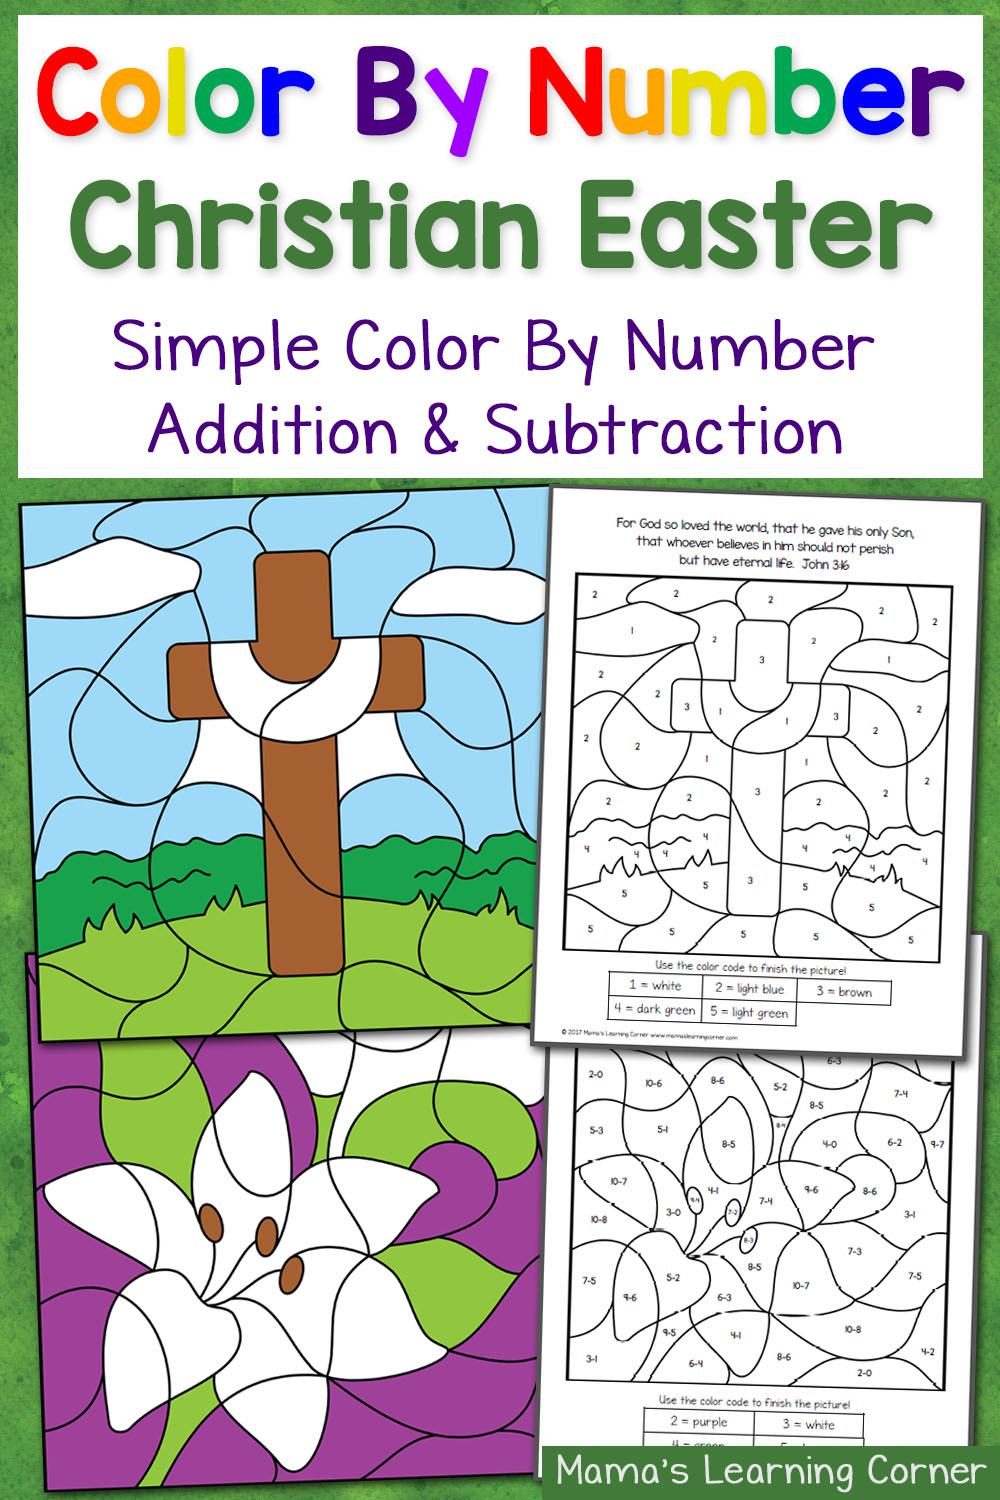 big-list-of-christian-easter-worksheets-and-printable-hands-on